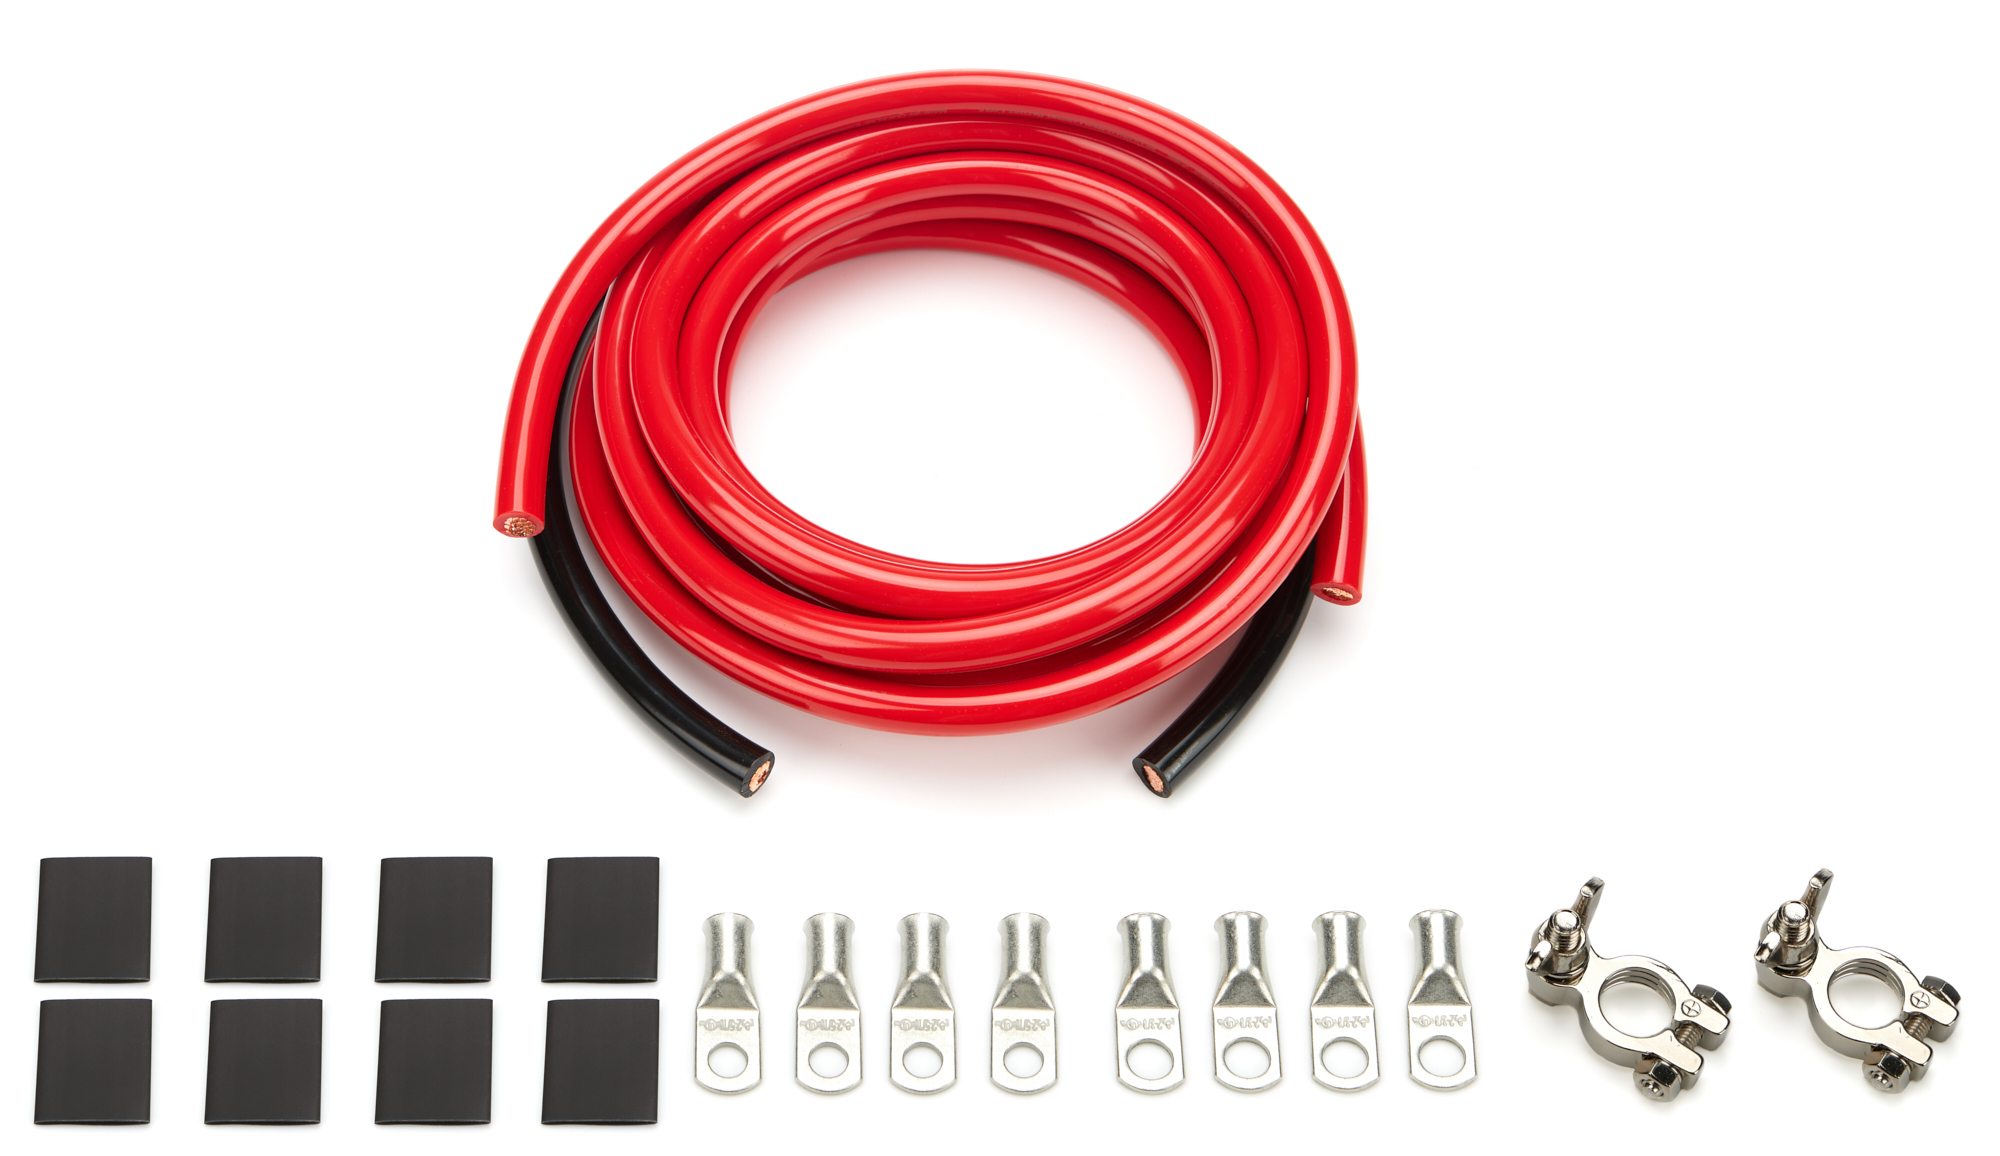 QuickCar 57-010 Battery Cable Kit, 2 Gauge, Top Mount Battery Terminals, Terminals / Heat Shrink Included, Copper, 15 ft Red / 2 ft Black, Kit